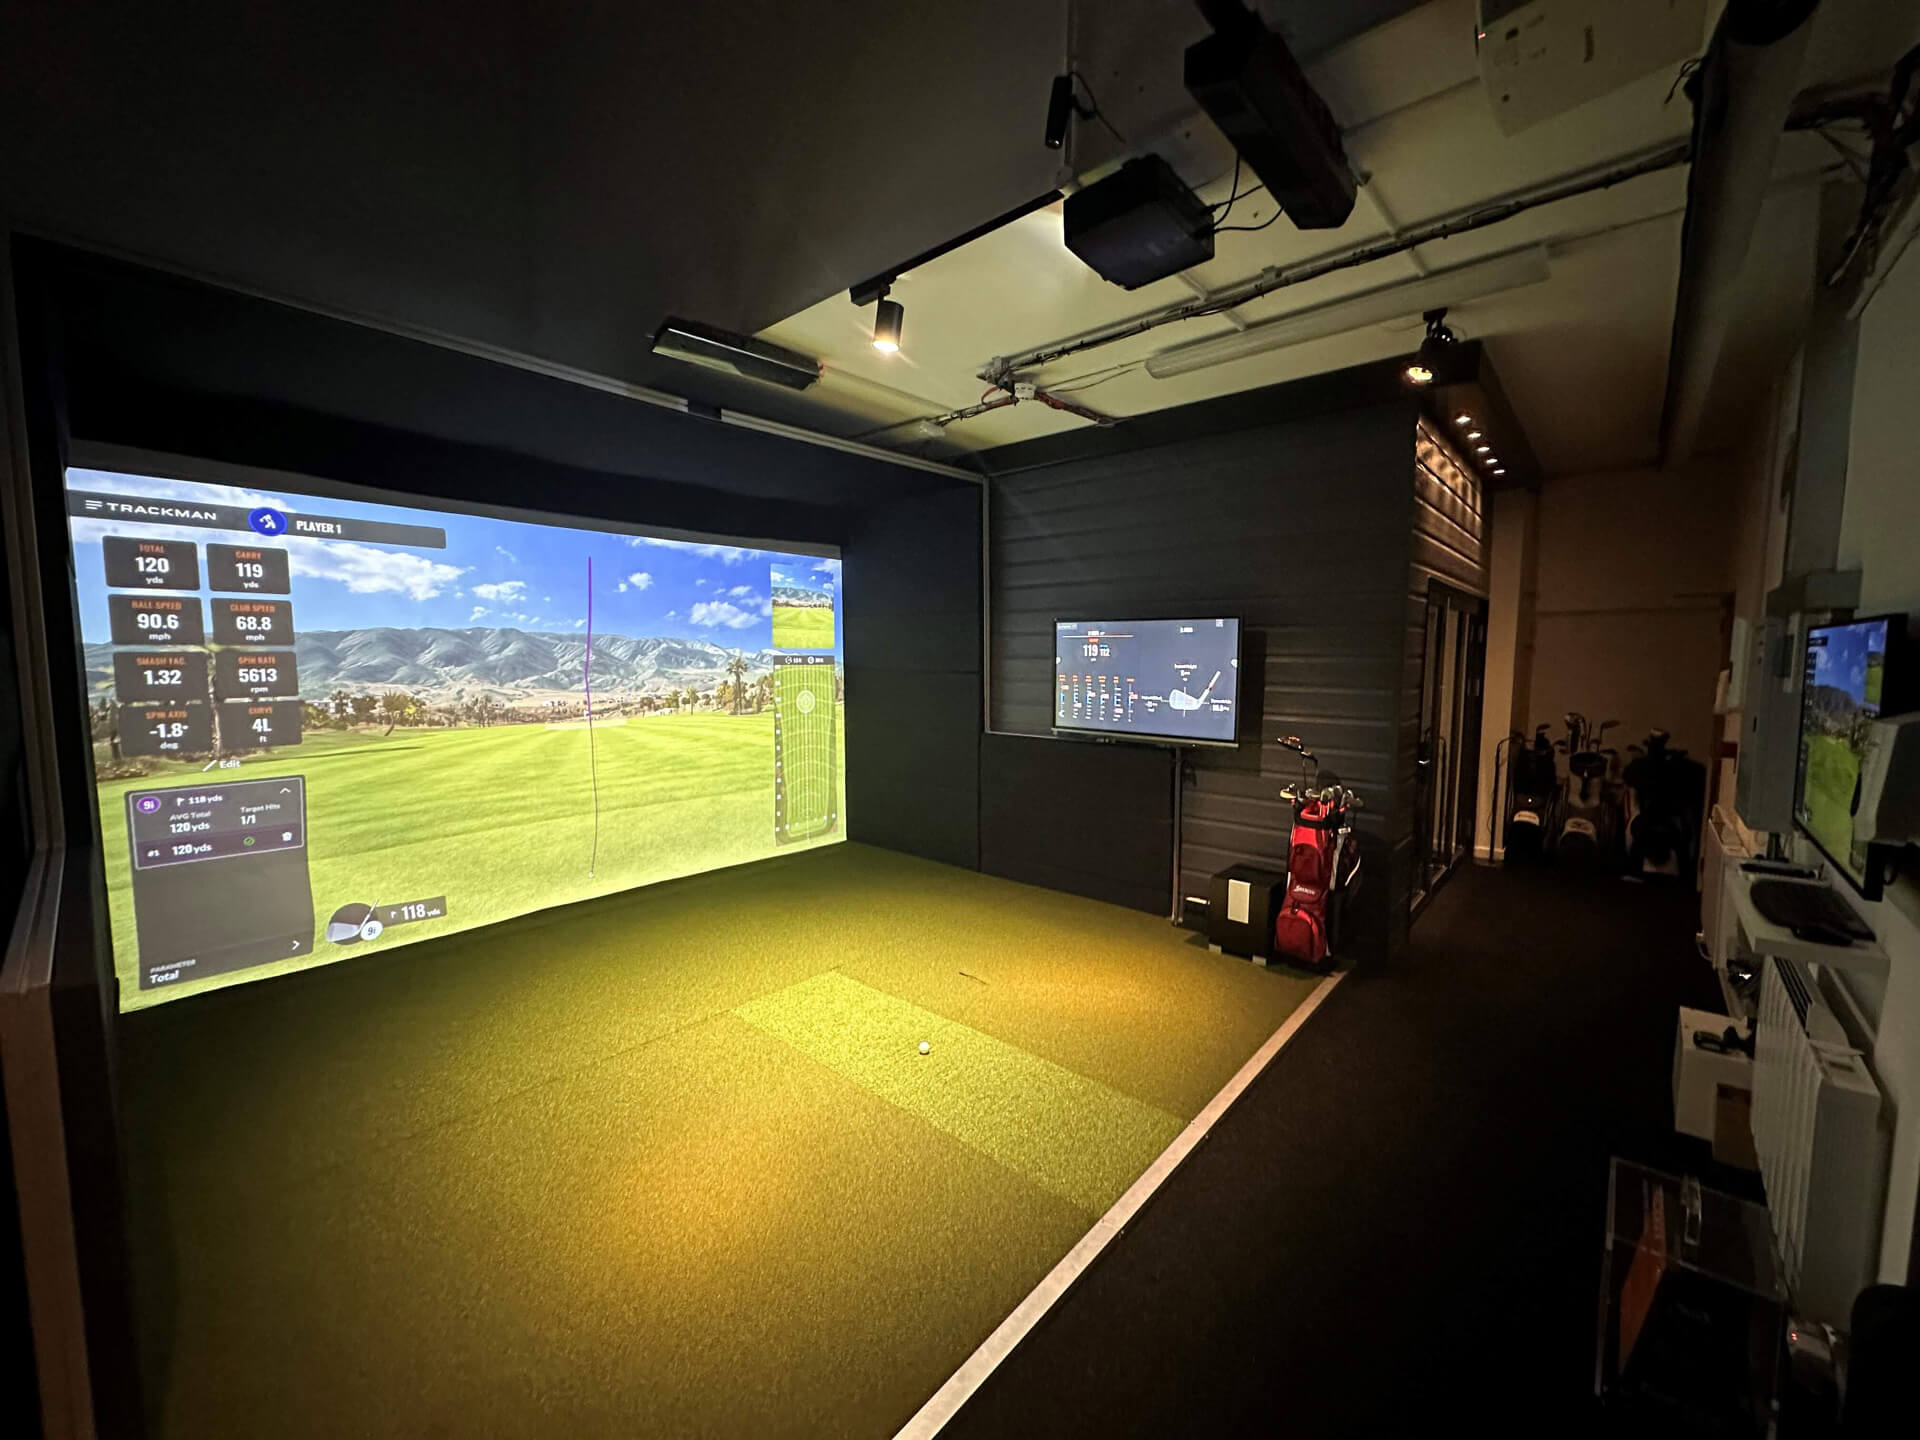 Golf simulator software from Golf Tech Systems